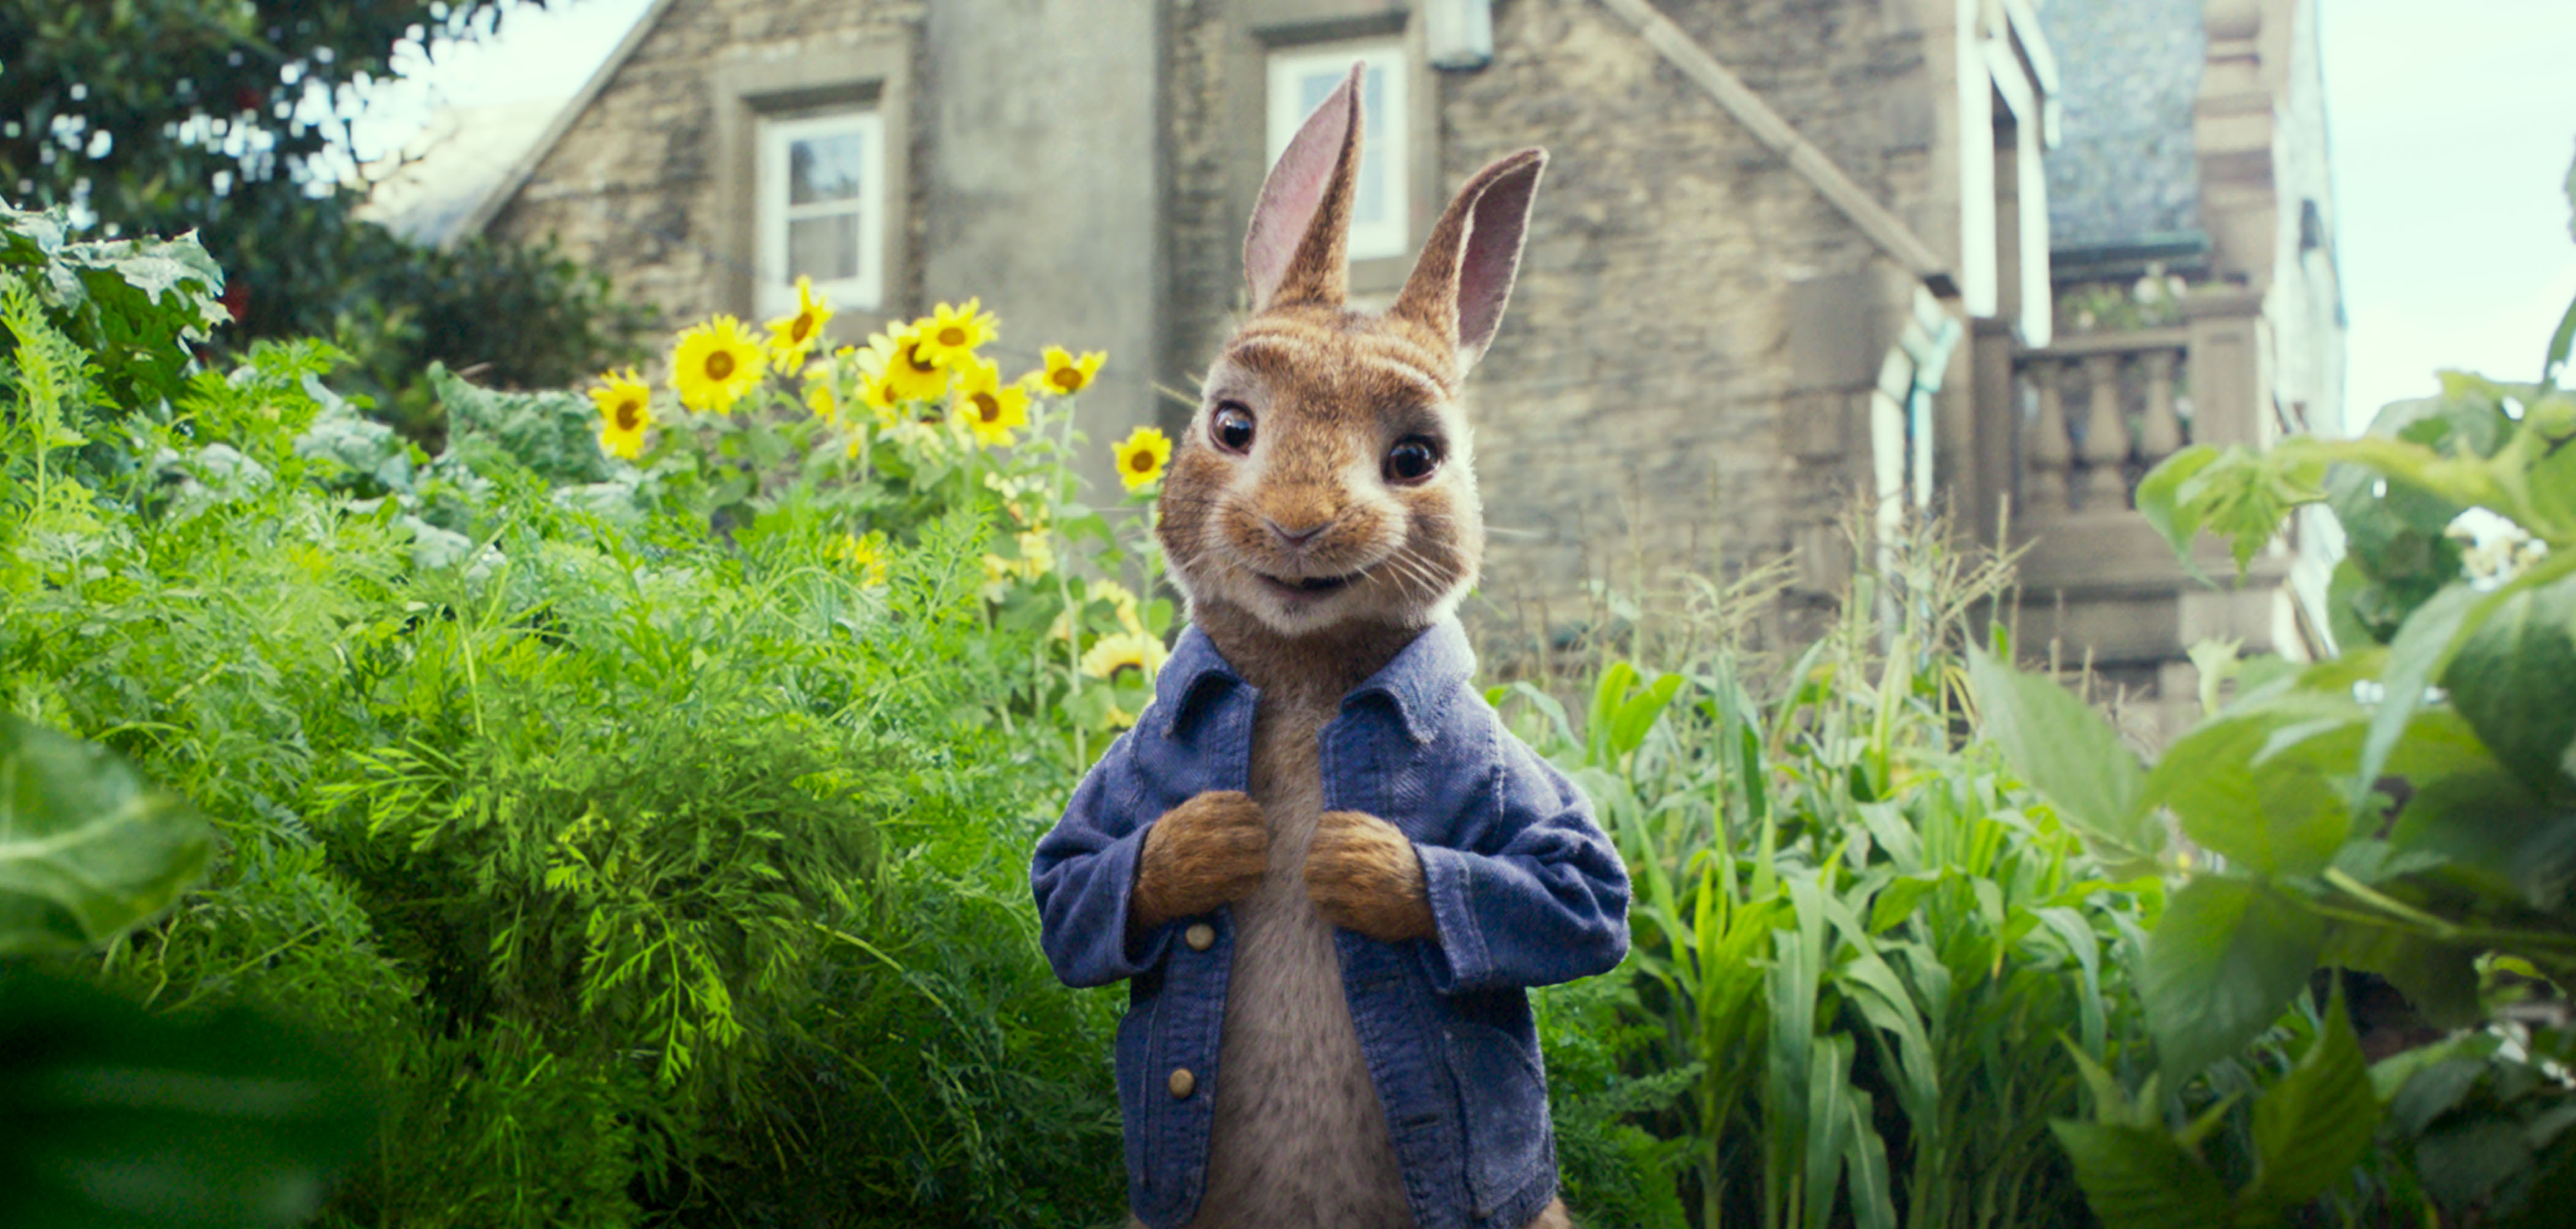 Peter Rabbit Movie - when using allergies as a means of bullying. This is NOT ok! www.intolerantgourmand.com